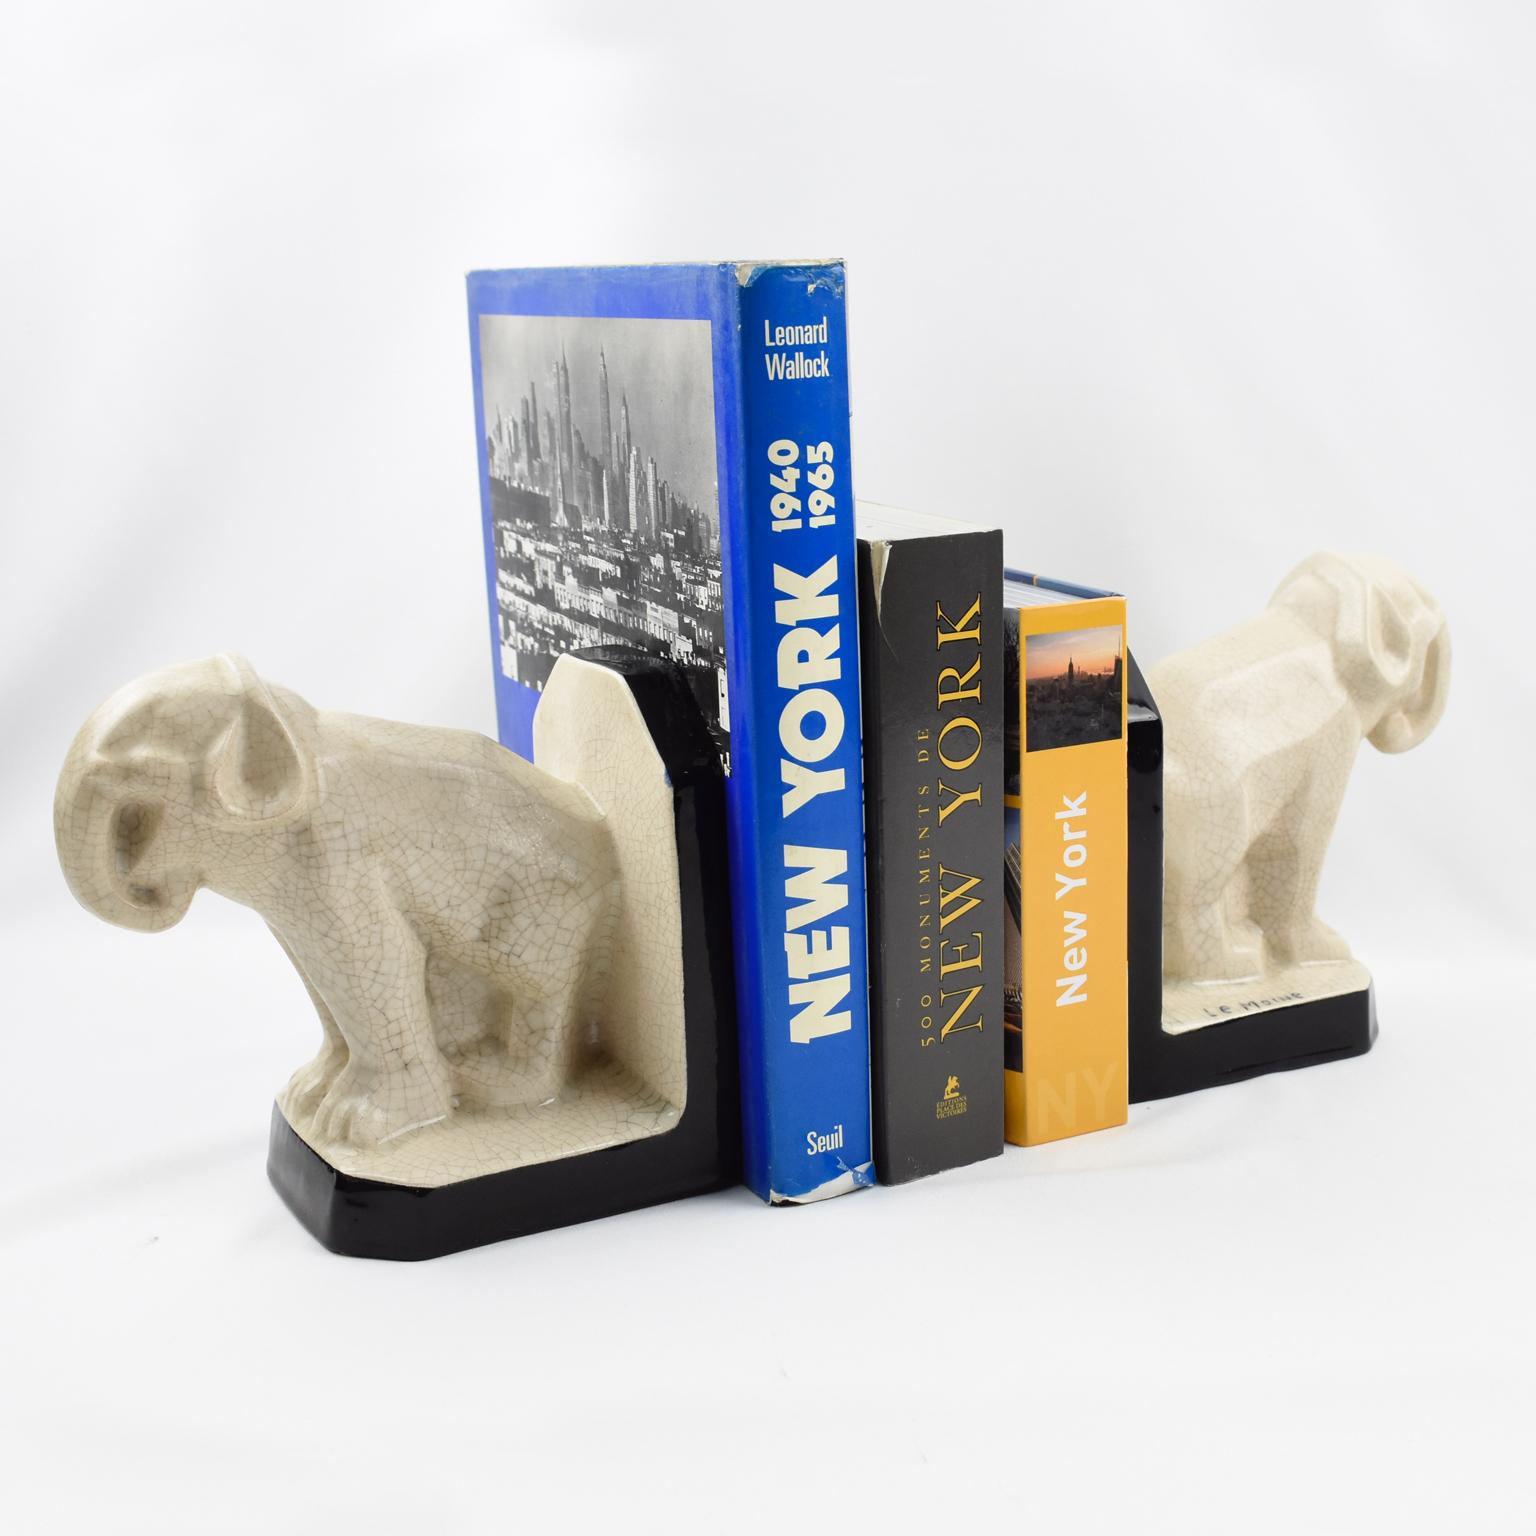 French Art Deco Crackle Ceramic Elephant Sculpture Bookends by Le Moine, France 1930s For Sale